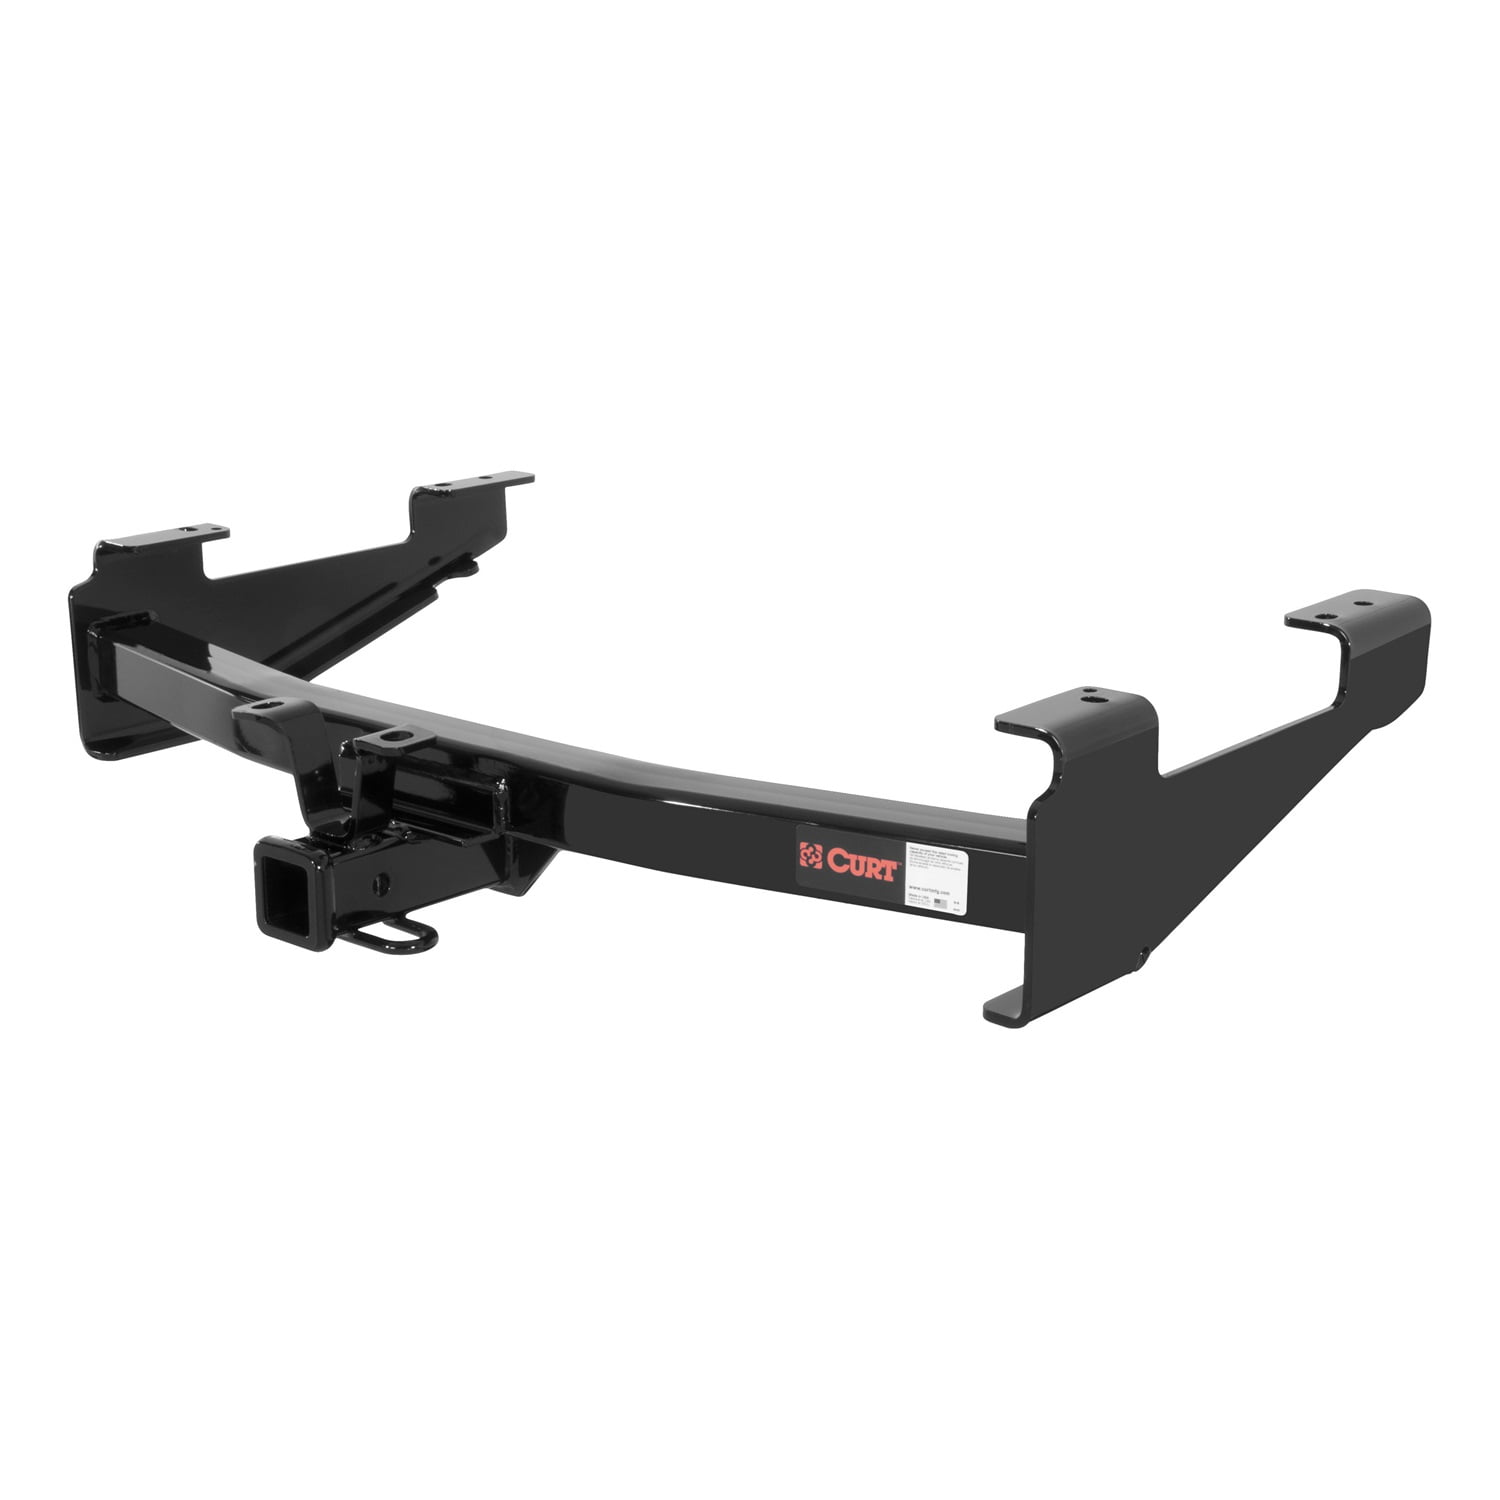 3500 GMC Sierra 2500 Fits for Select Chevrolet Silverado CURT 14211 Class 4 Trailer Hitch with 2-Inch Receiver 